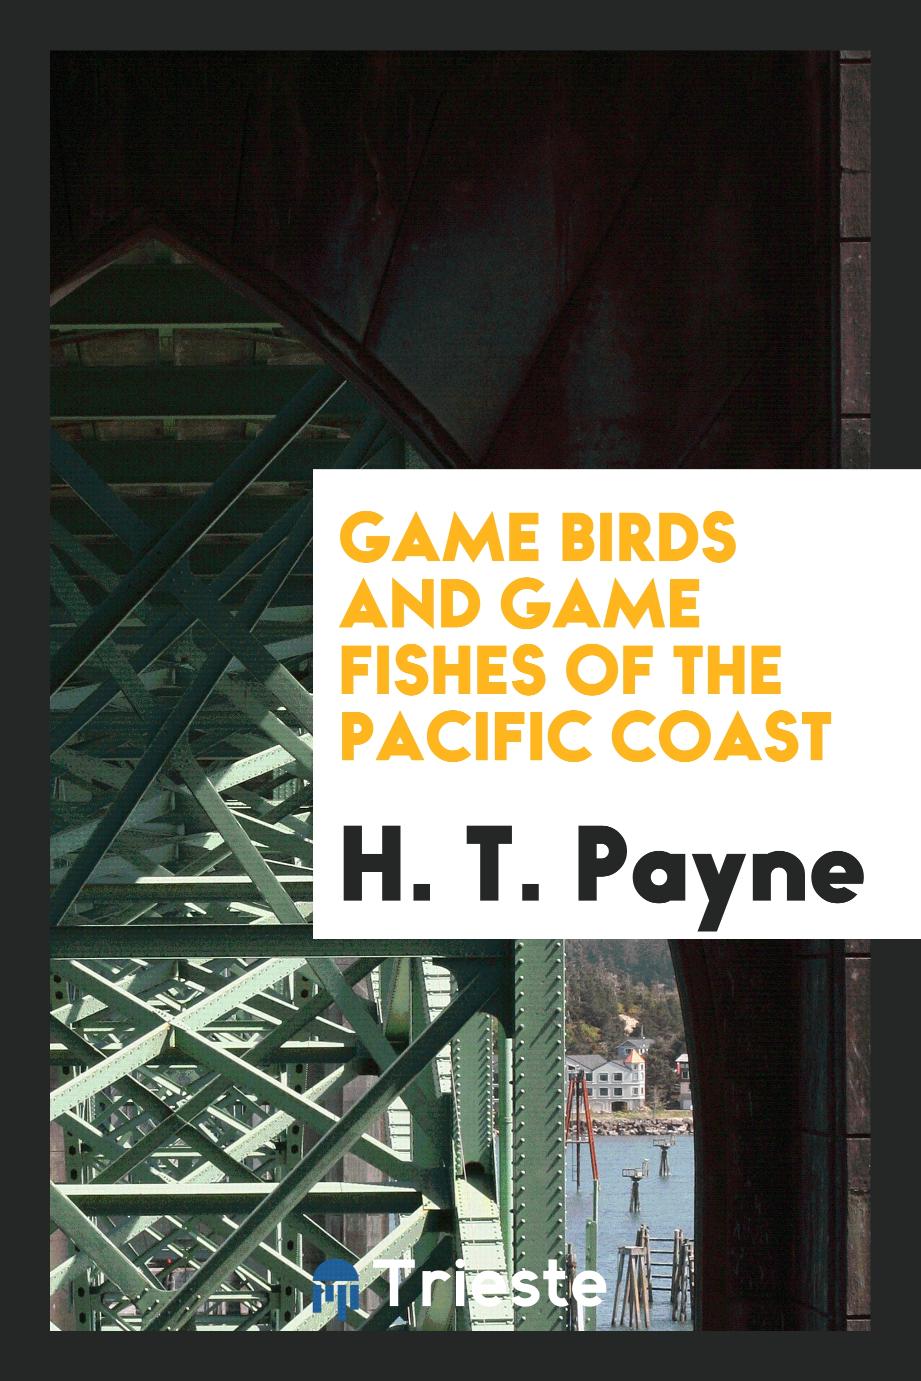 Game birds and game fishes of the Pacific Coast